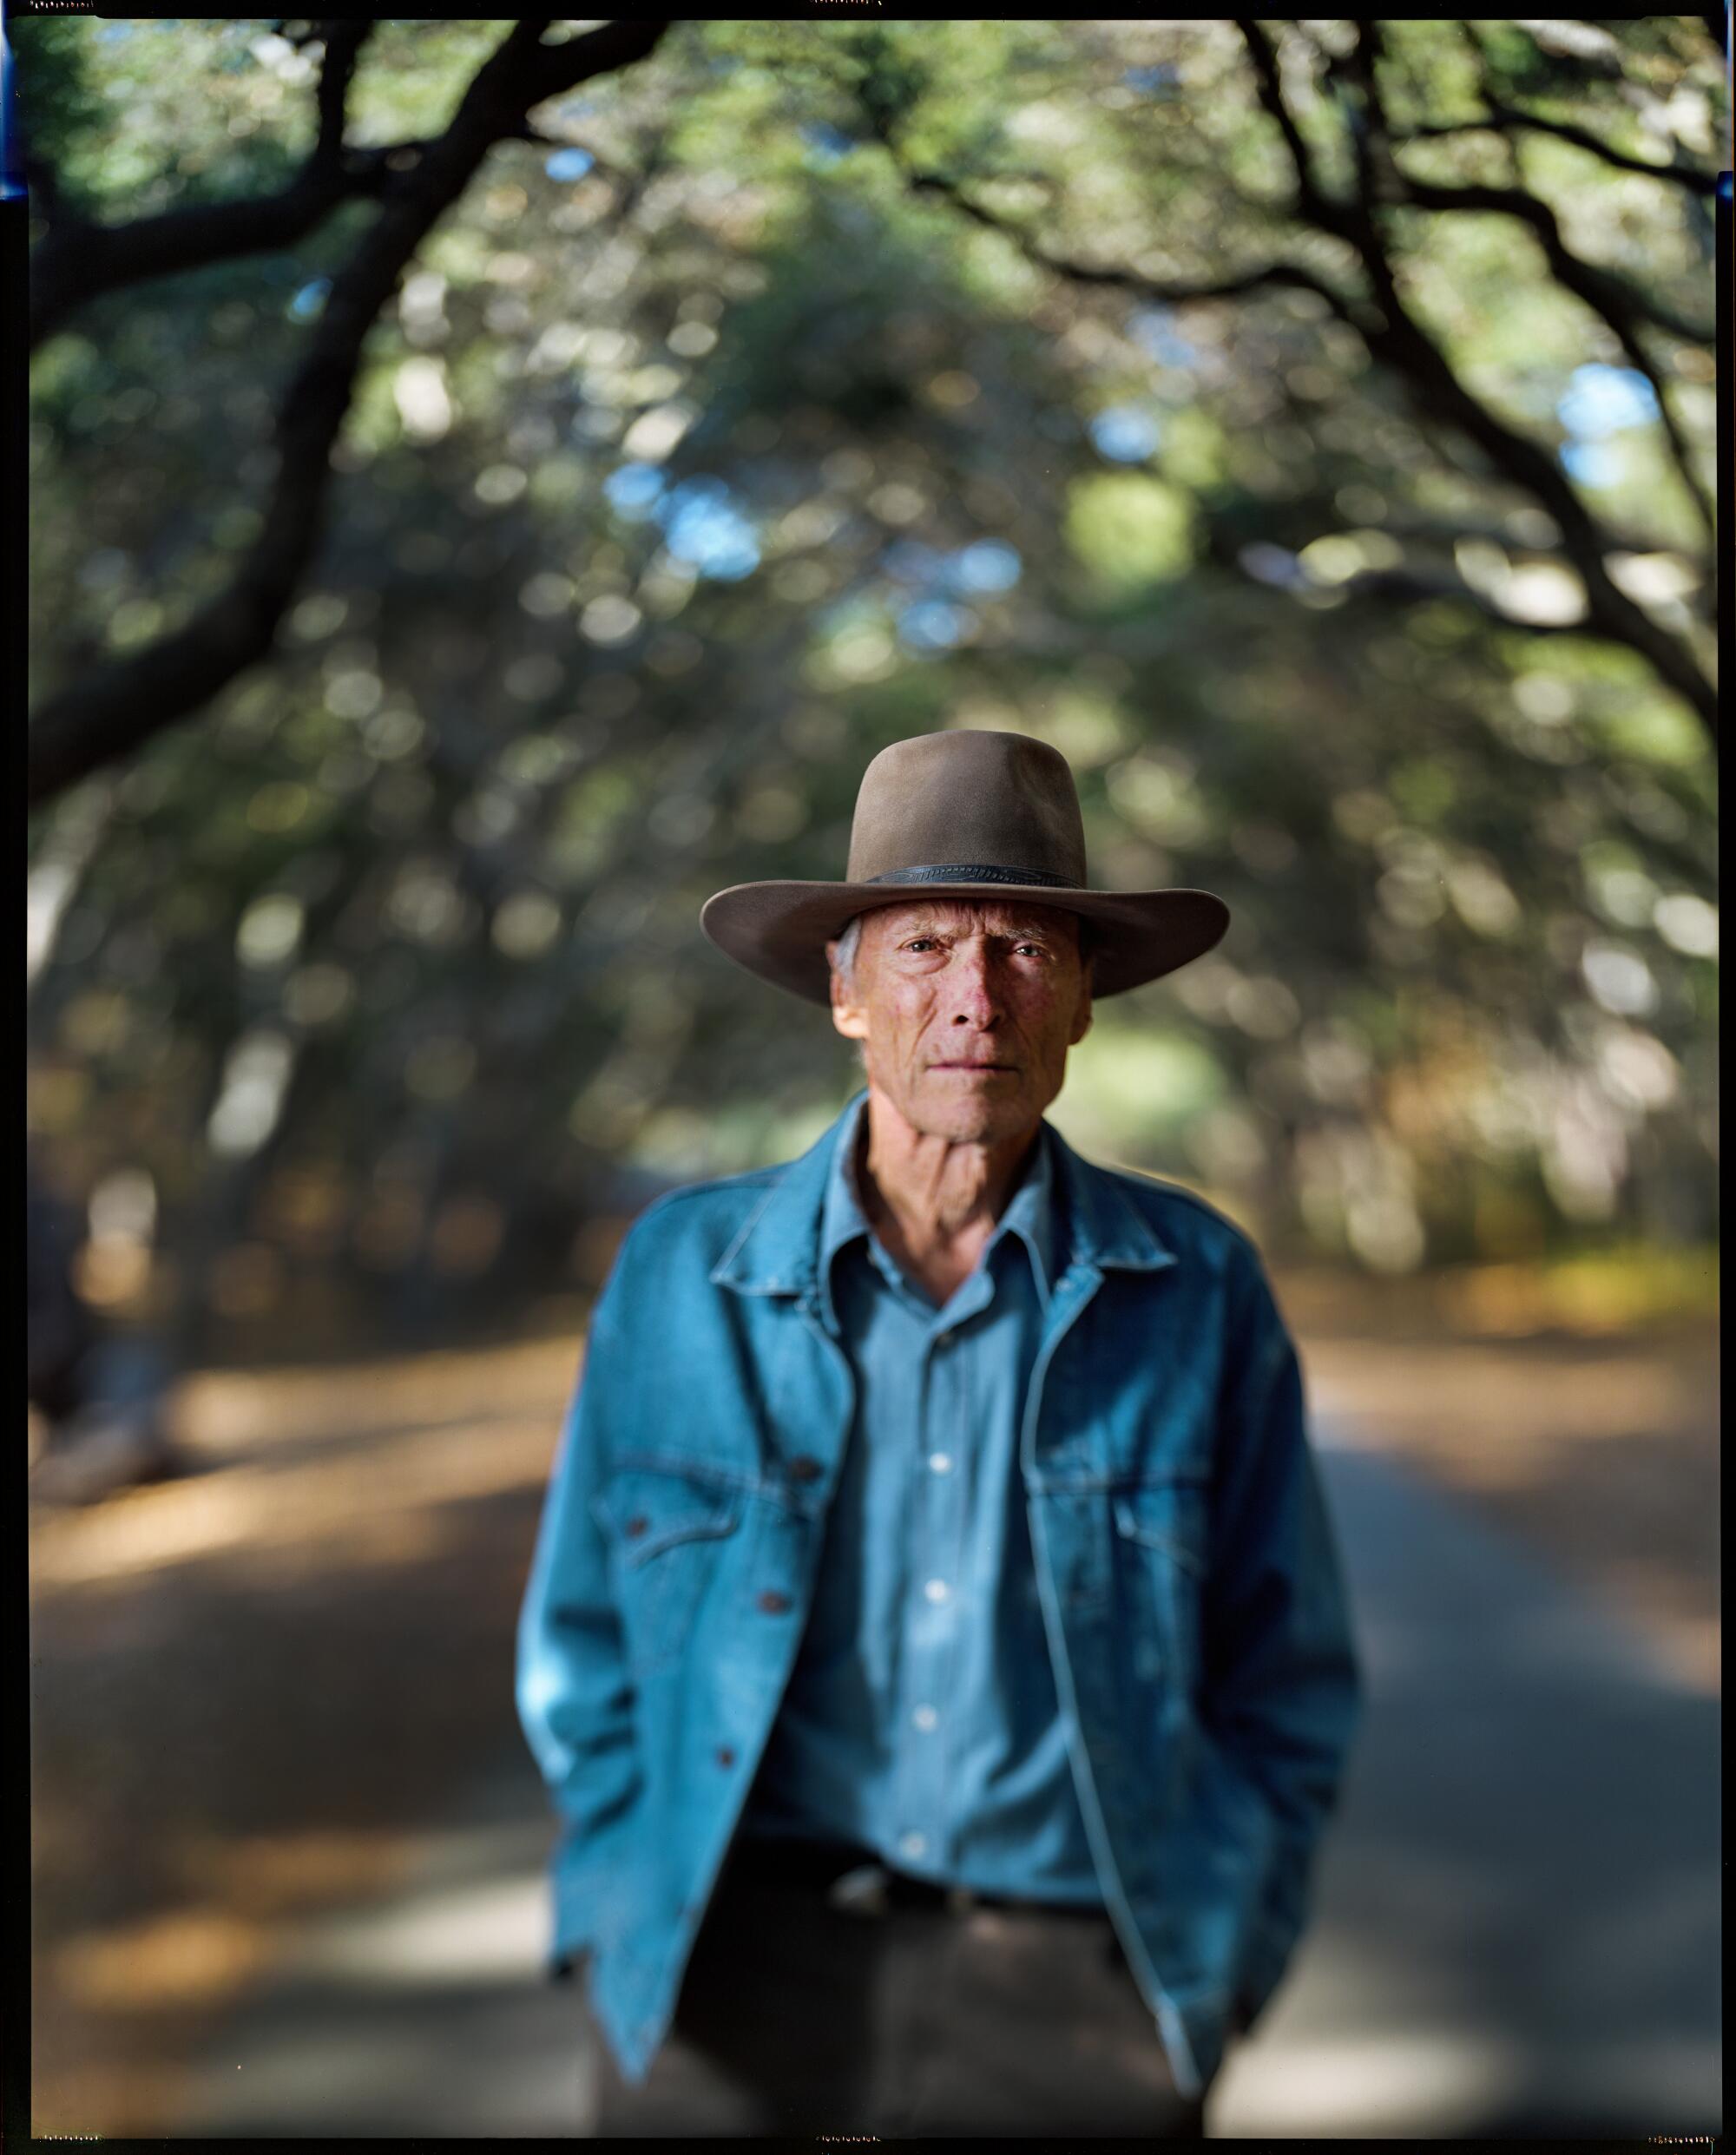 A man in a denim jacket and brimmed hat stands under oak trees for a portrait.